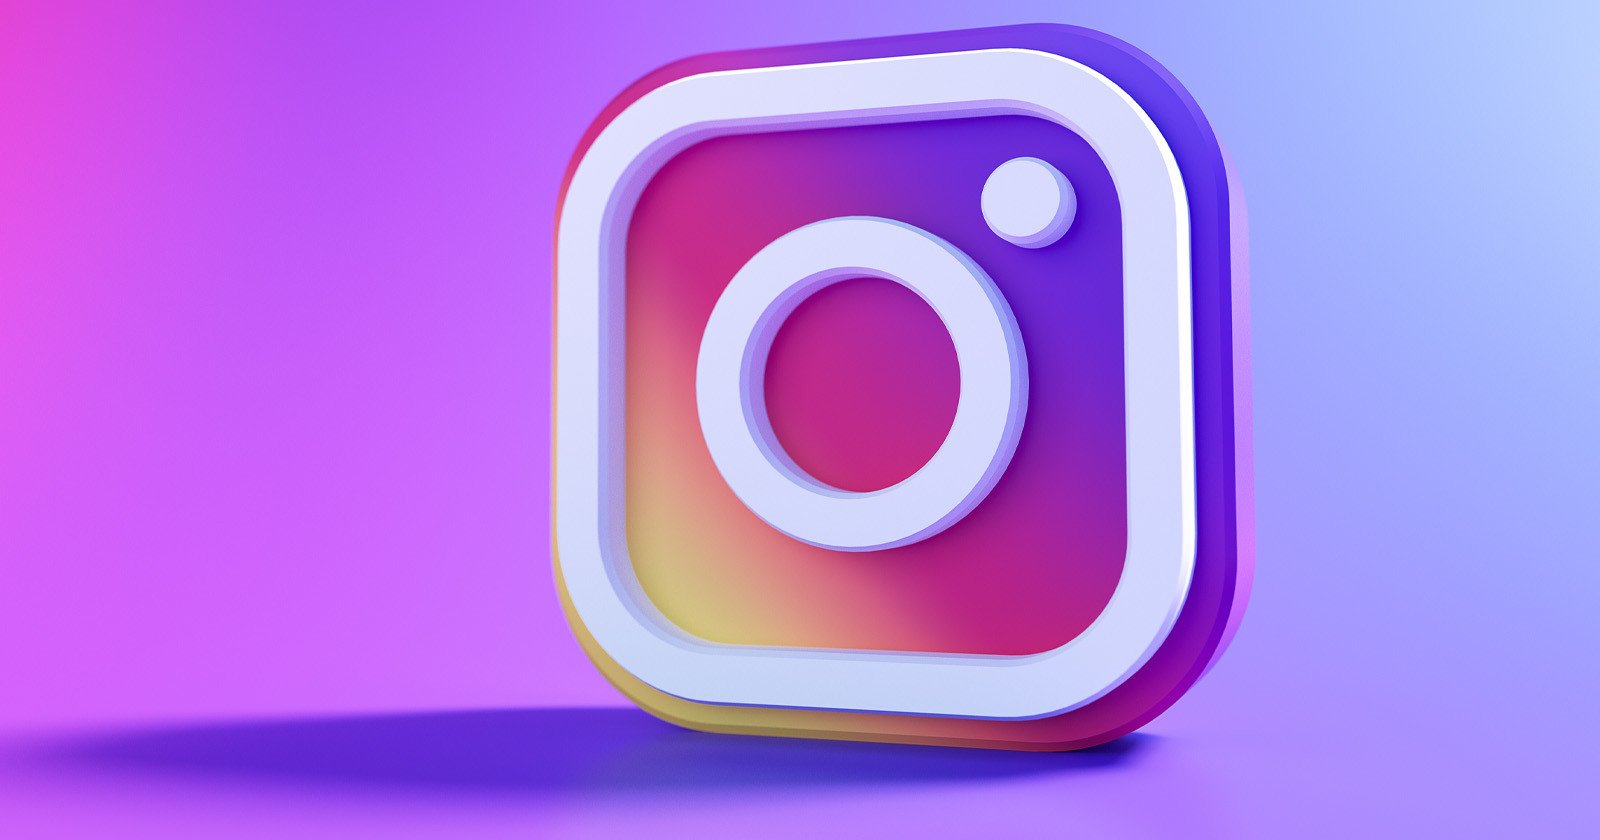 Instagram Was The Number One Downloaded App Globally in Q4 2021